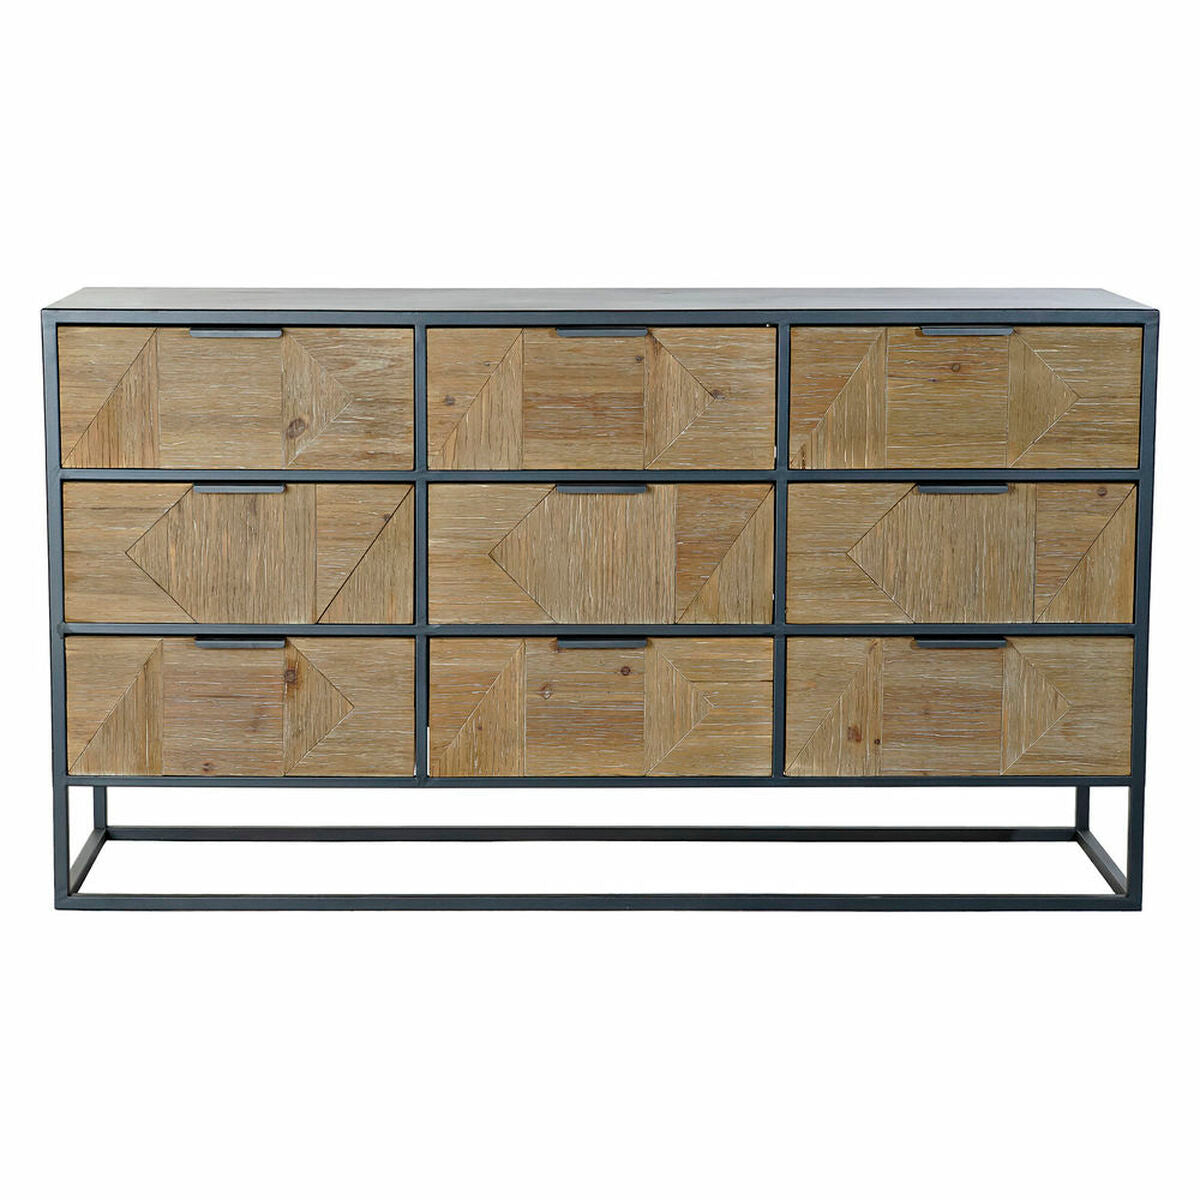 Black Sideboard with Wooden Drawers and Black Metal Legs (123 x 40 x 68 cm)